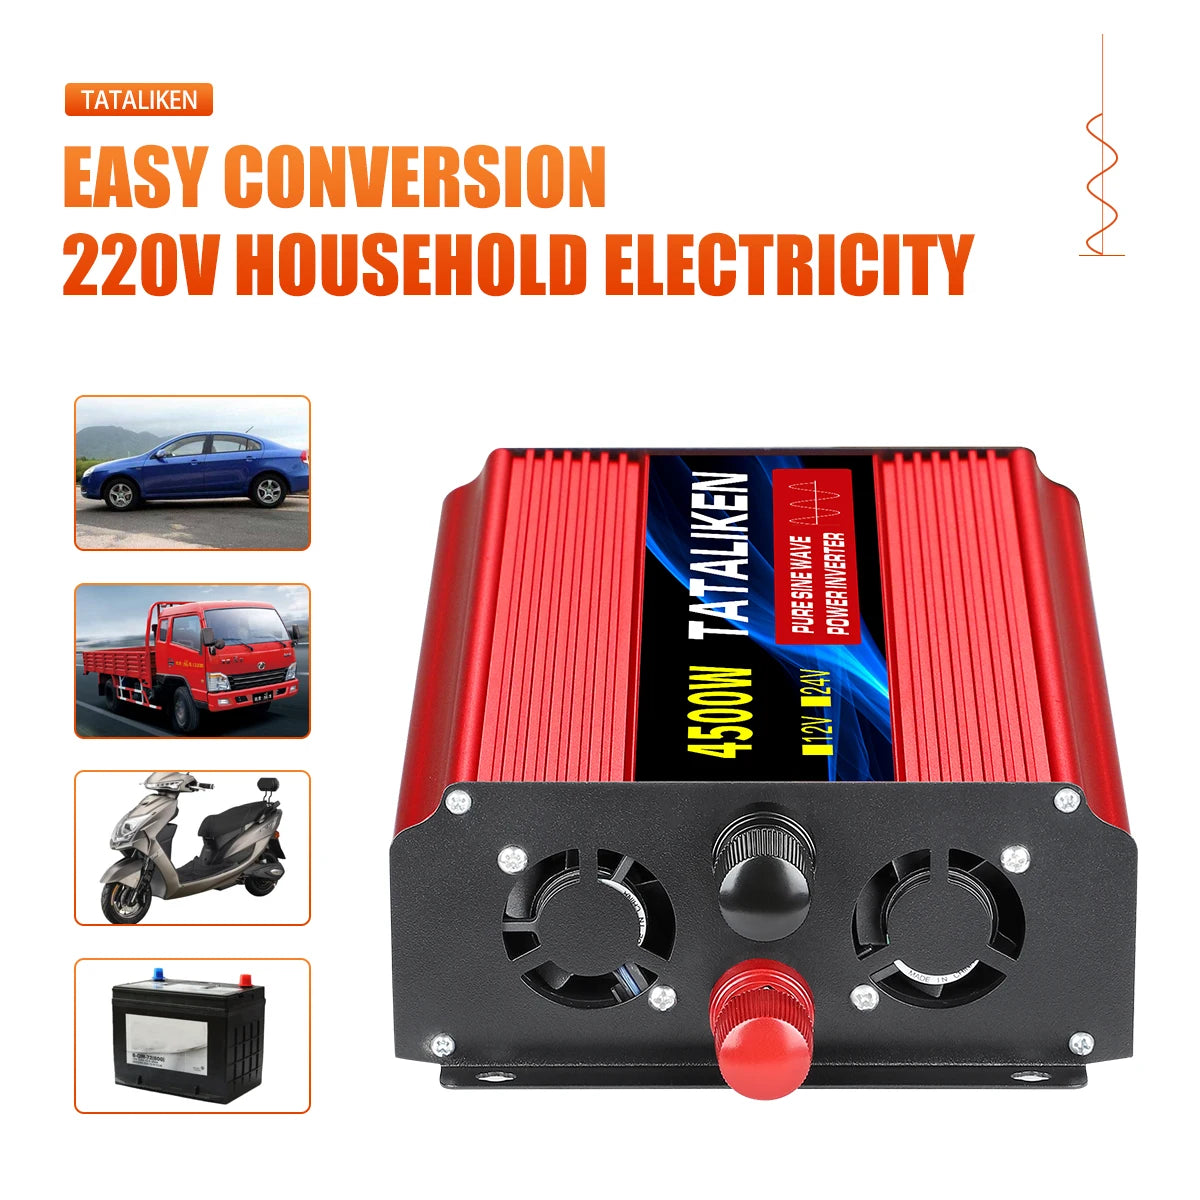 Inverter, Converts DC power to AC household electricity with pure sine wave and LED display.